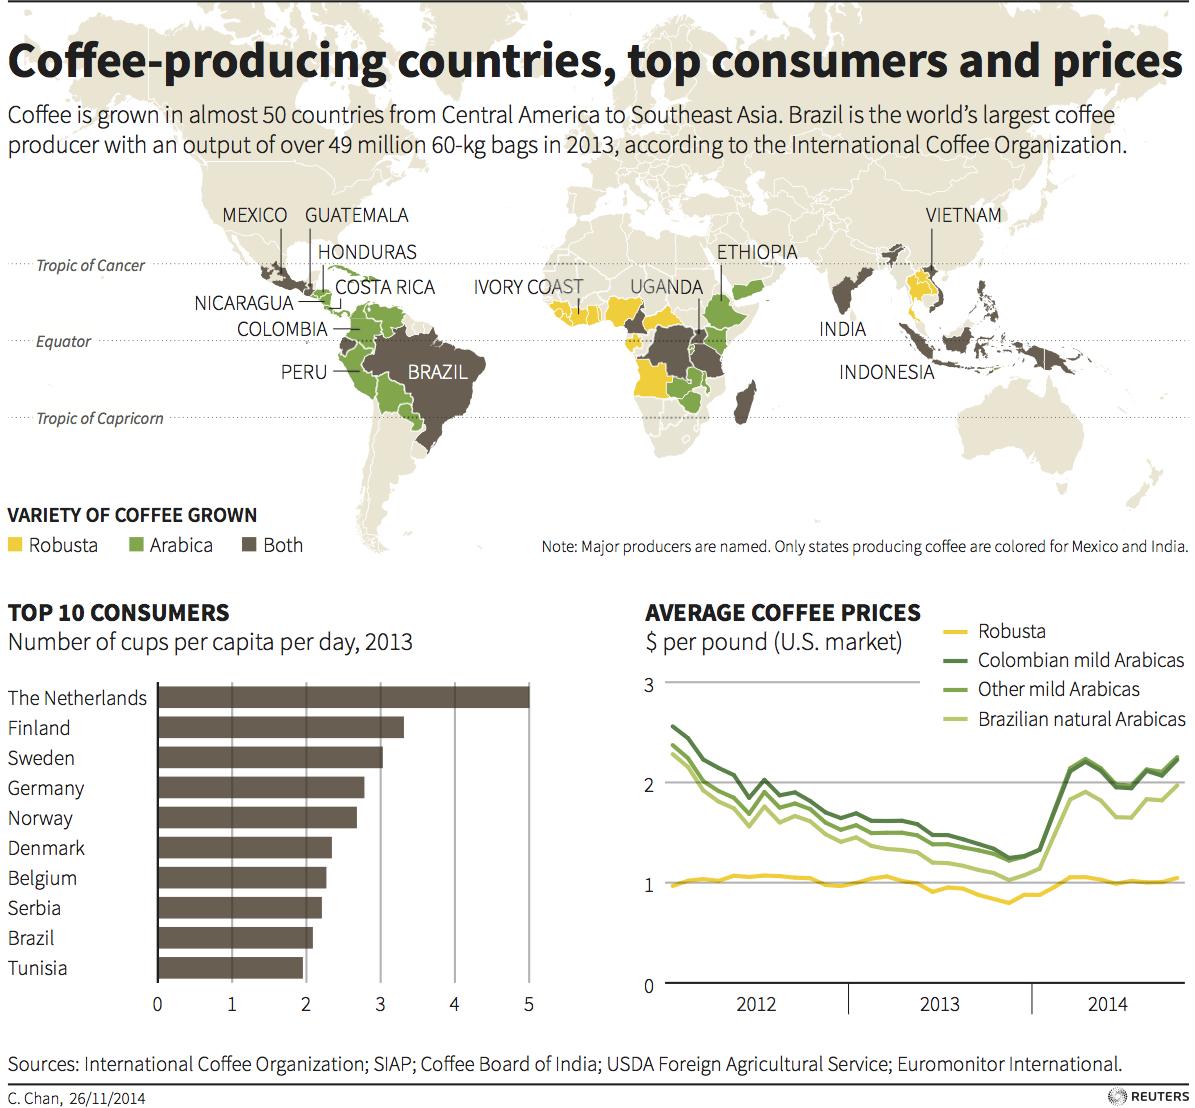 Adam Elman on Twitter: "Great infographic on coffee production, consumption and prices via ...